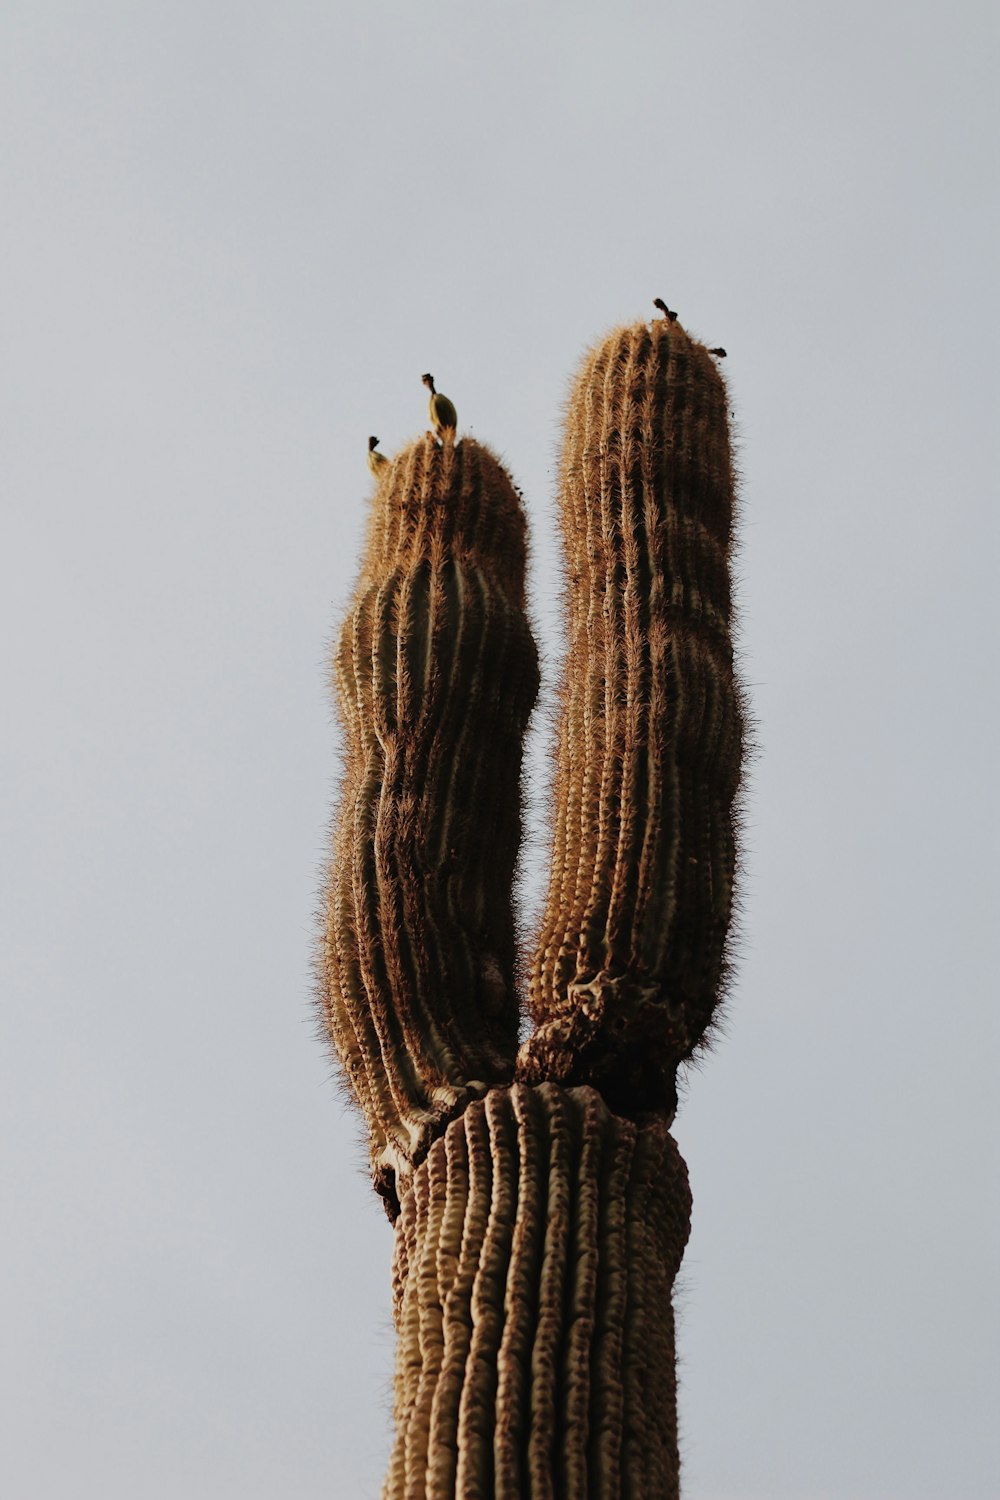 a cactus with a bird perched on top of it